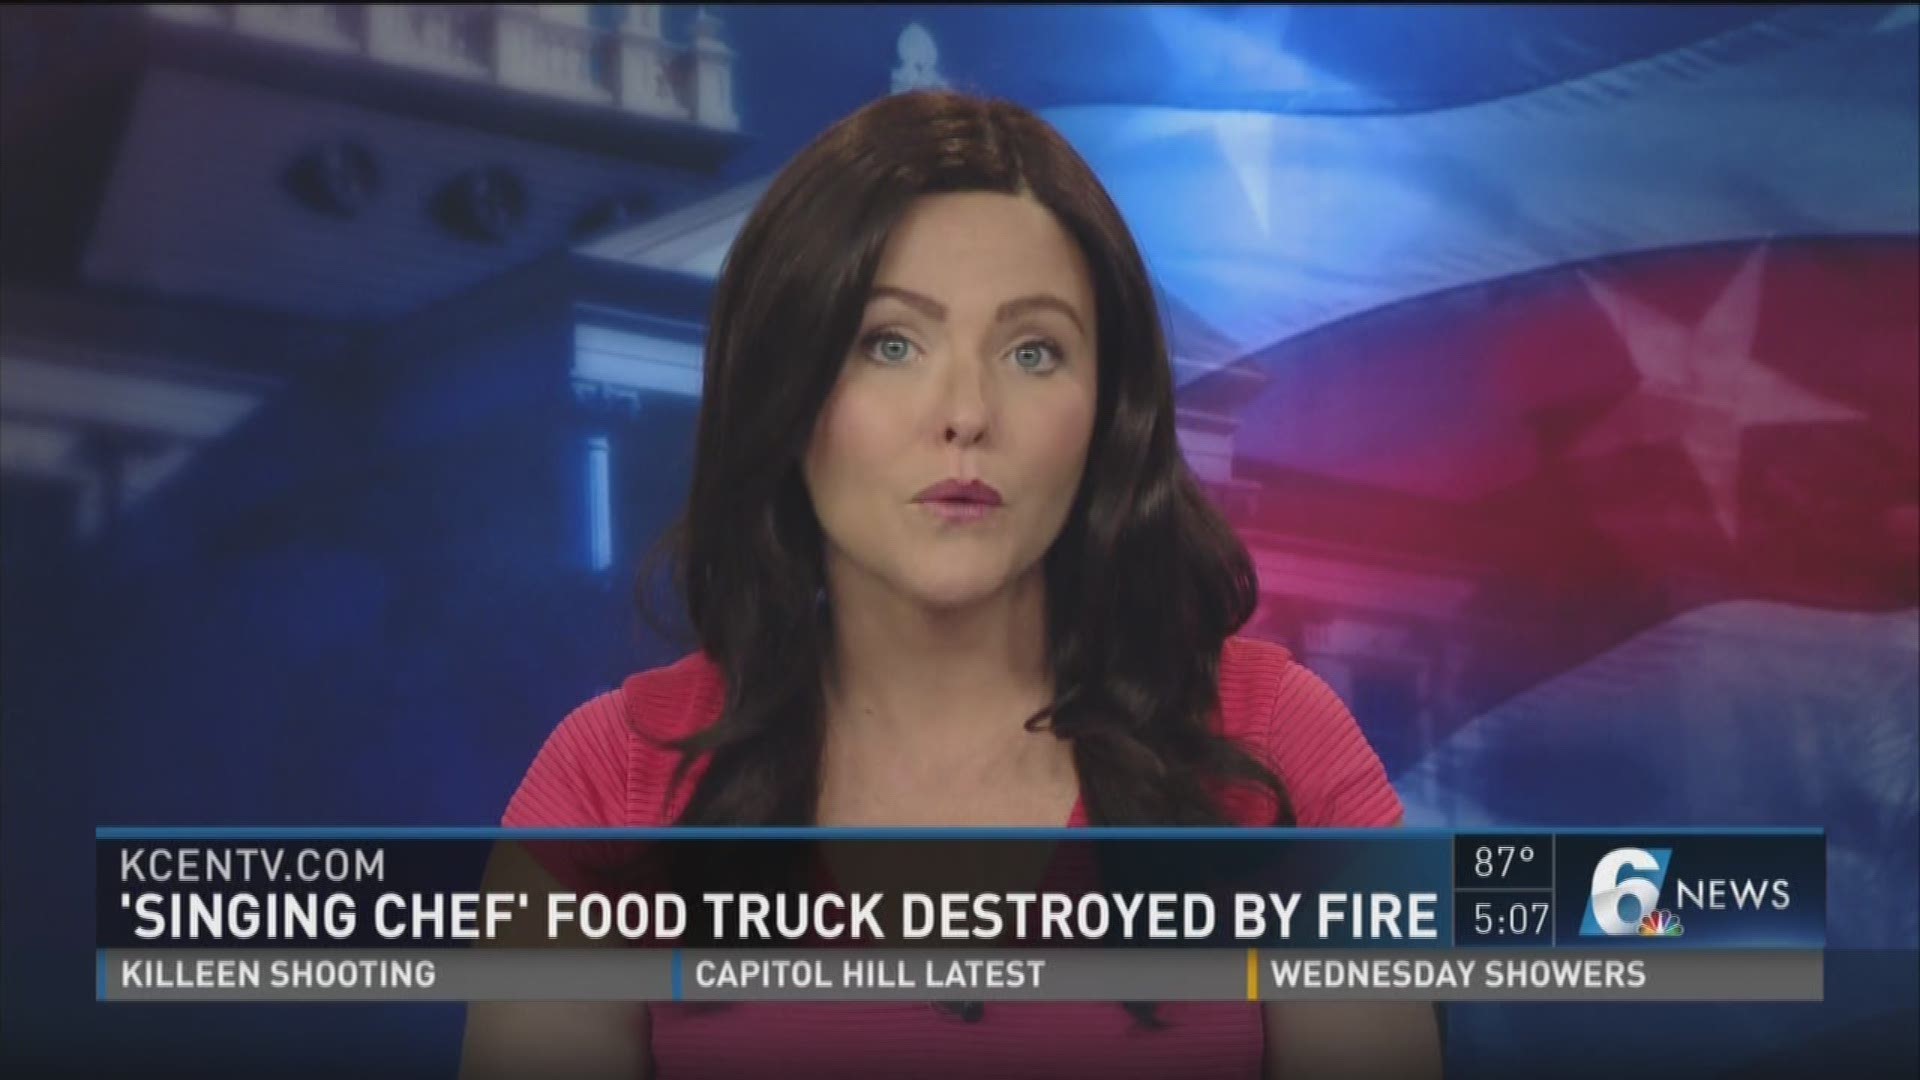 The most well-known food truck in Temple was destroyed by a fire. 